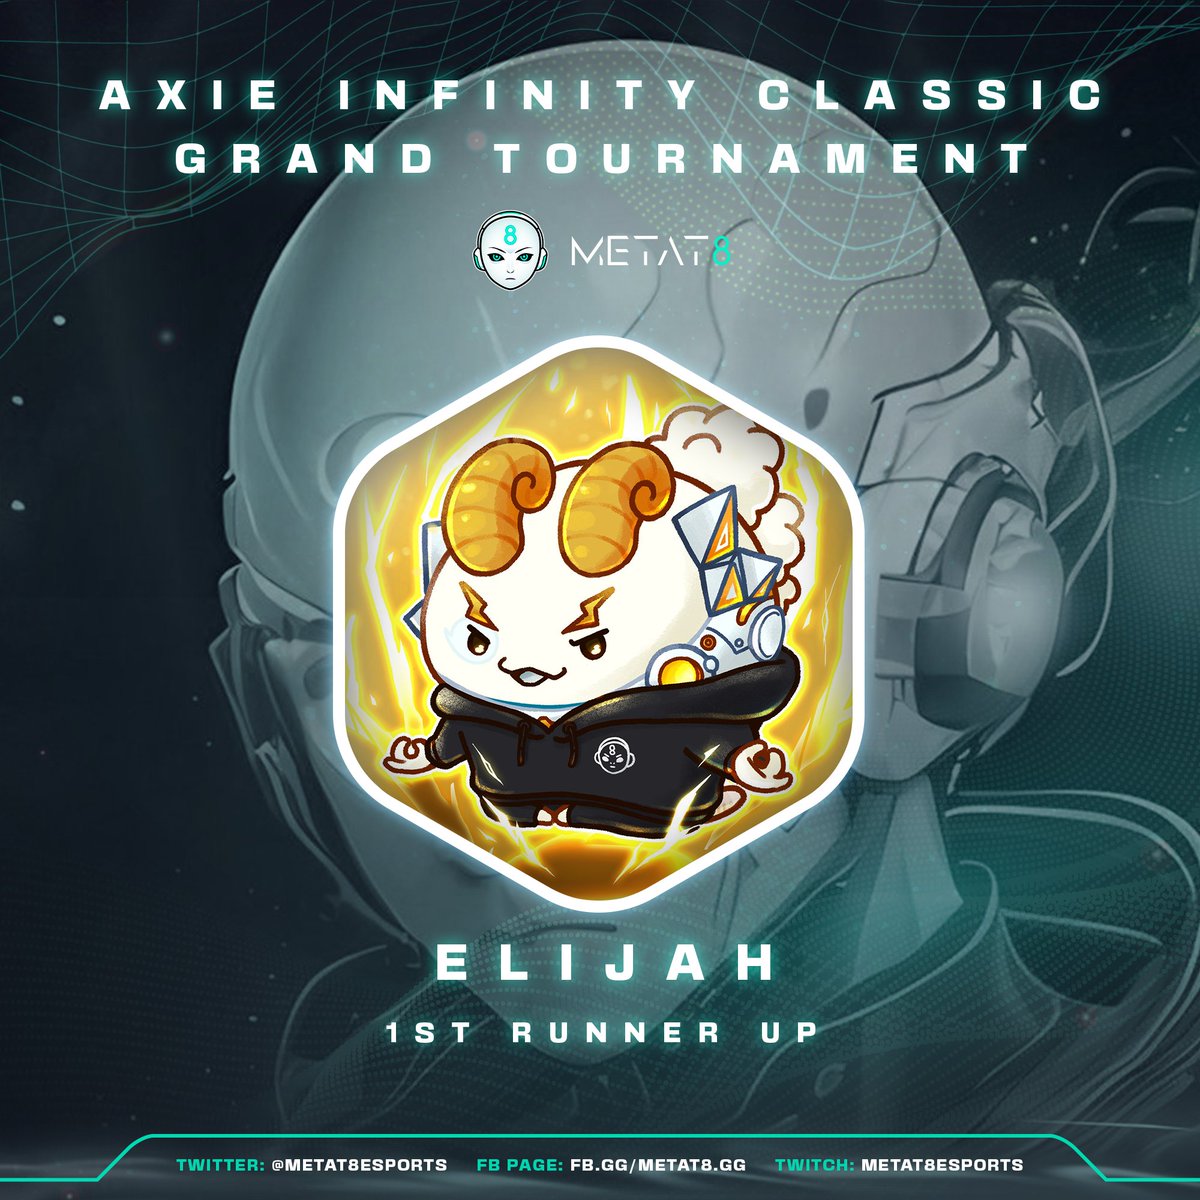 Some people are just natural born killers. @elijahflowers finishes second in the biggest @AxieInfinity Classic tournament ever - #2 out of over 70 thousand participants. 🐐